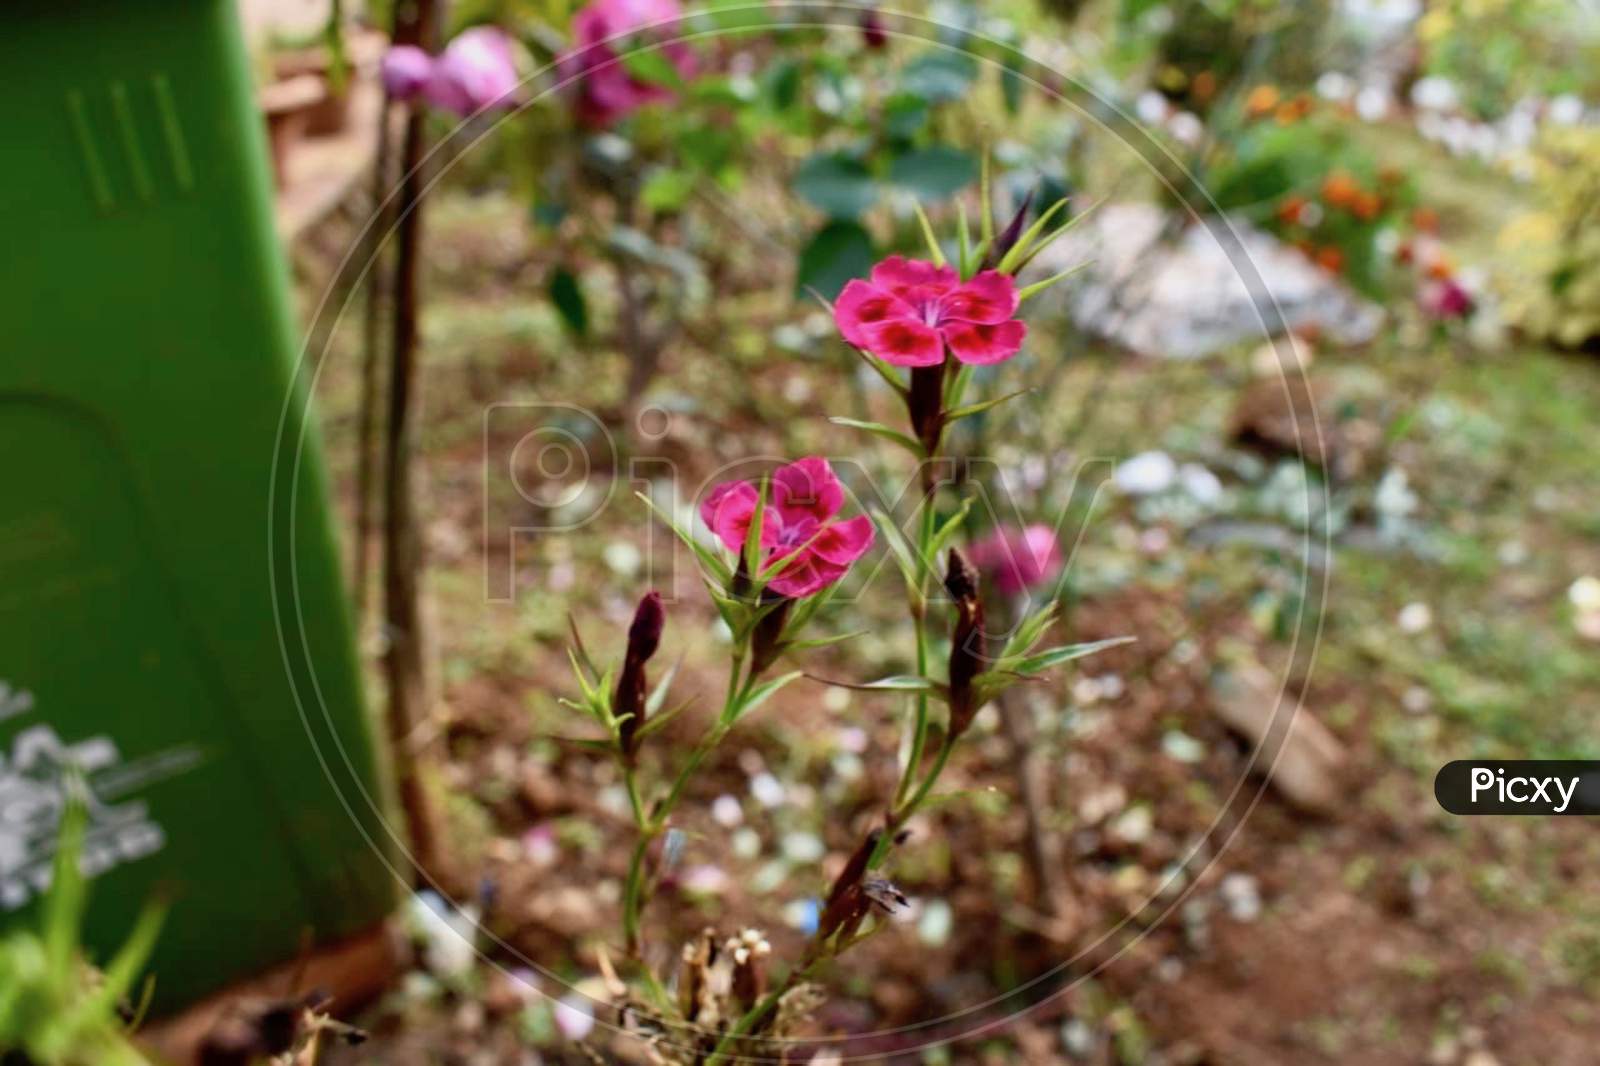 Flower in Garden Stock photos.This Photo Is Taken In Ranchi,Jharkhand ,India 2020